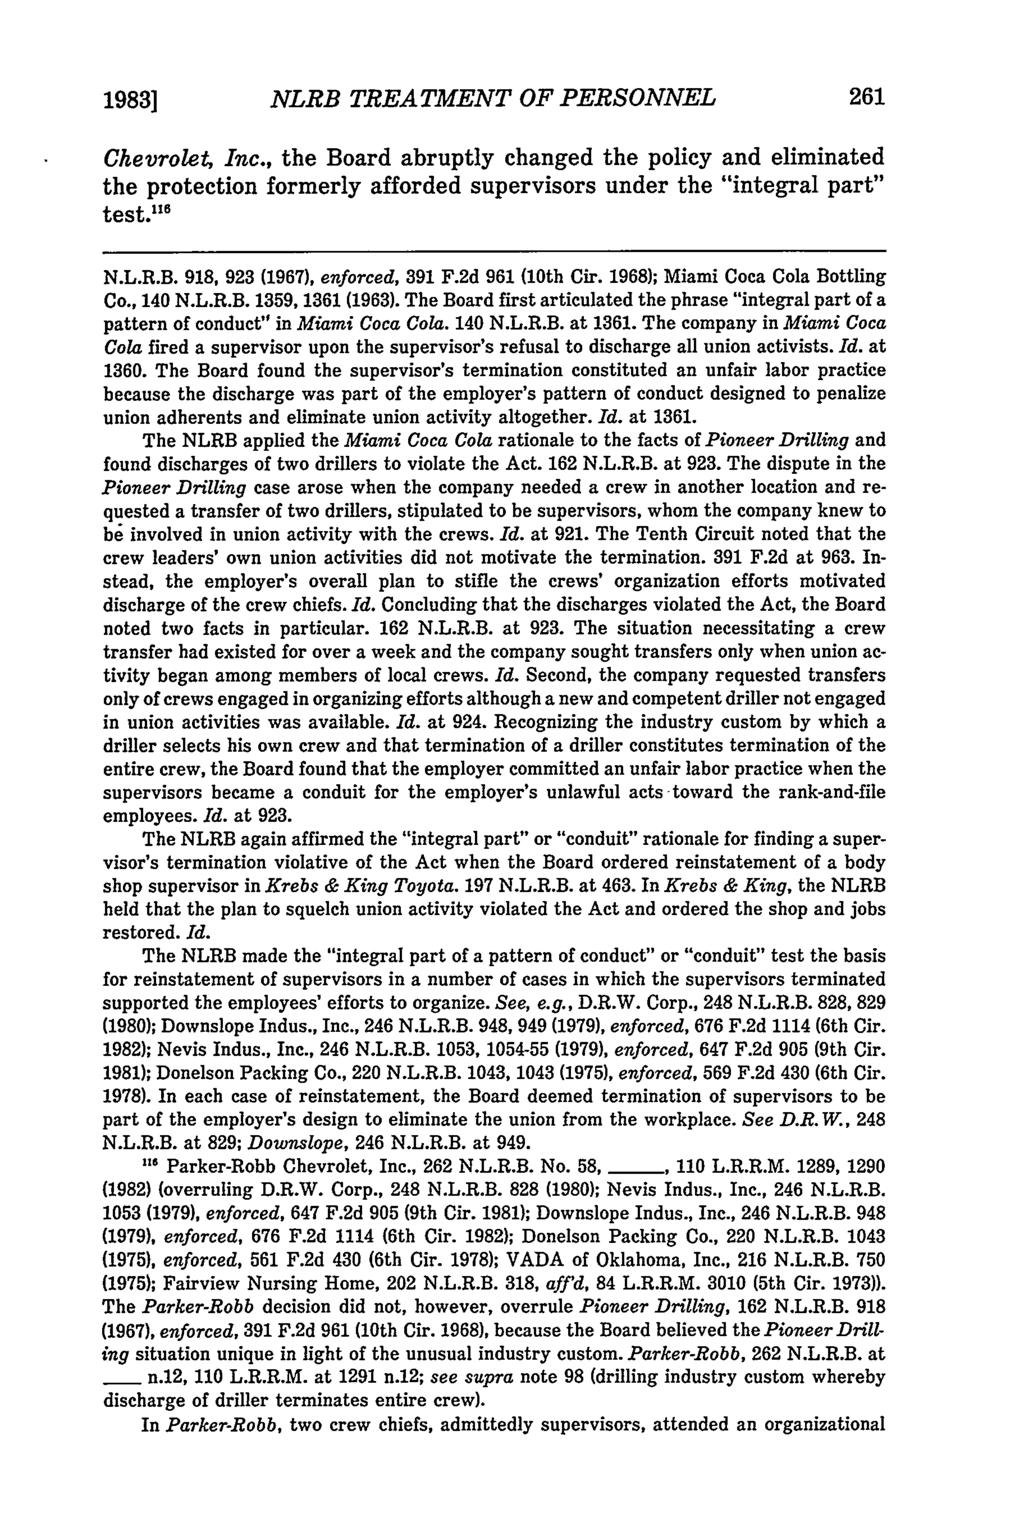 1983] NLRB TREATMENT OF PERSONNEL Chevrolet, Inc., the Board abruptly changed the policy and eliminated the protection formerly afforded supervisors under the "integral part" test." 6 N.L.R.B. 918, 923 (1967), enforced, 391 F.